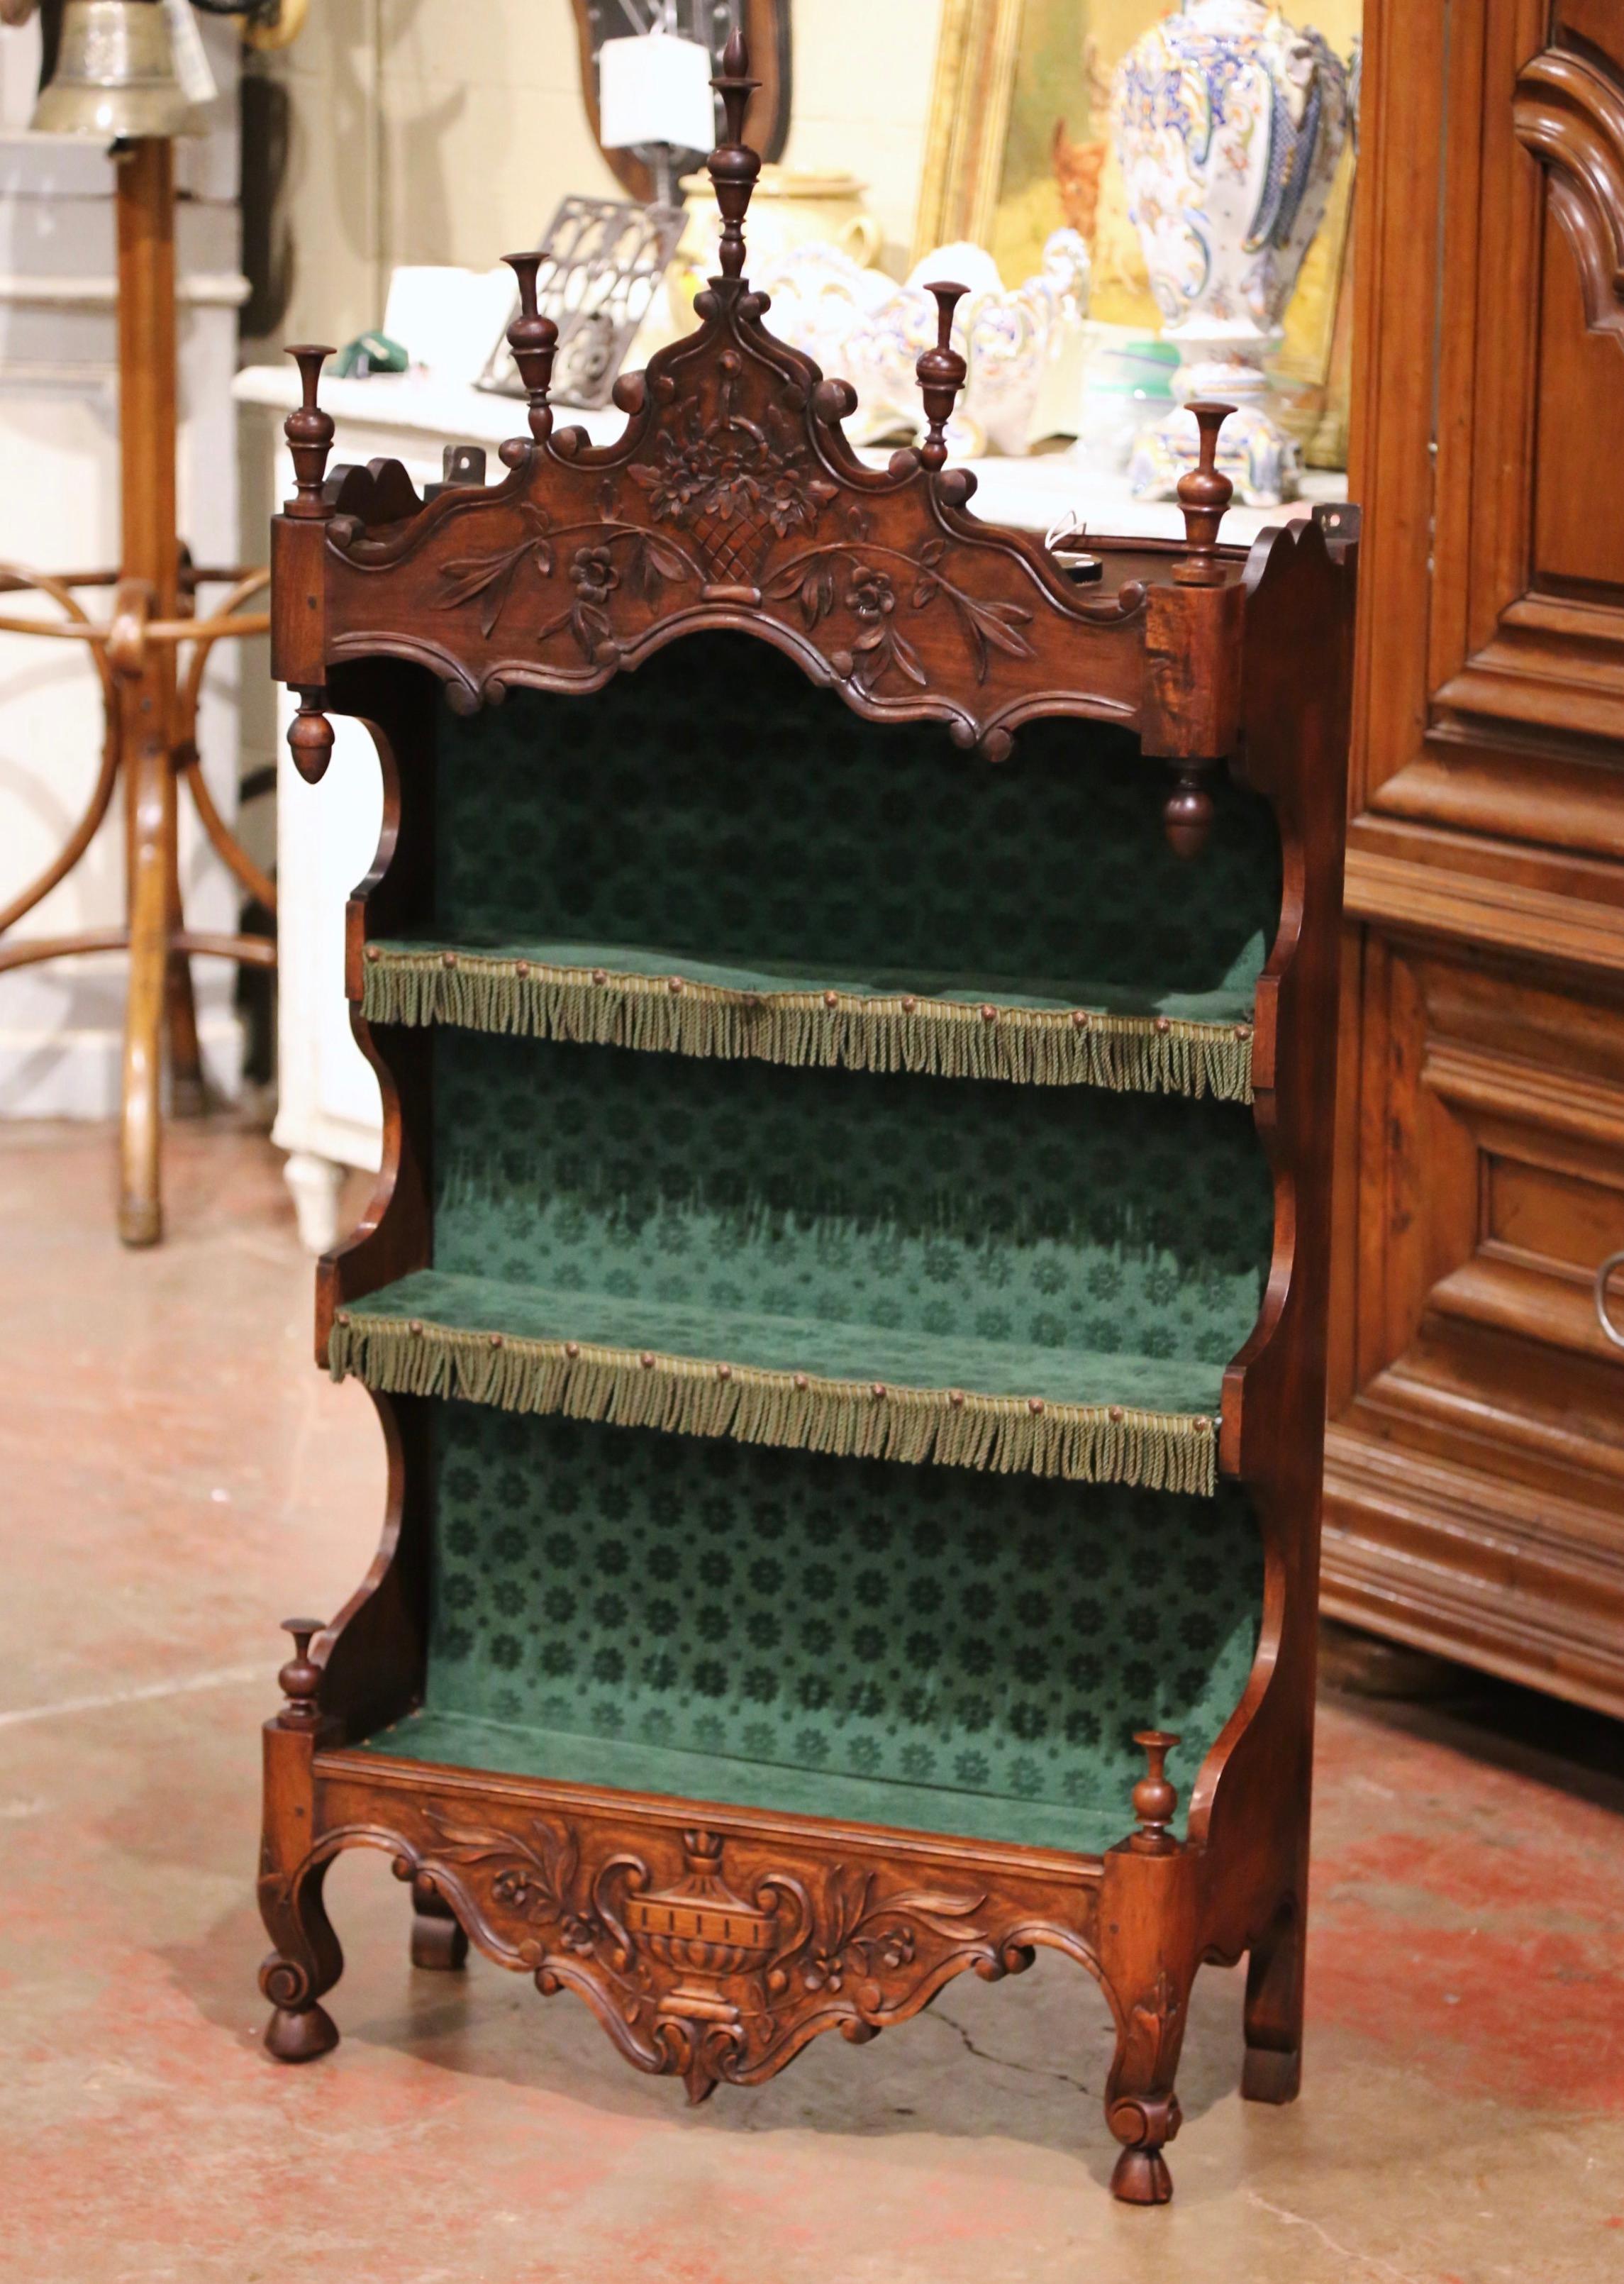 This beautifully carved, antique fruitwood 